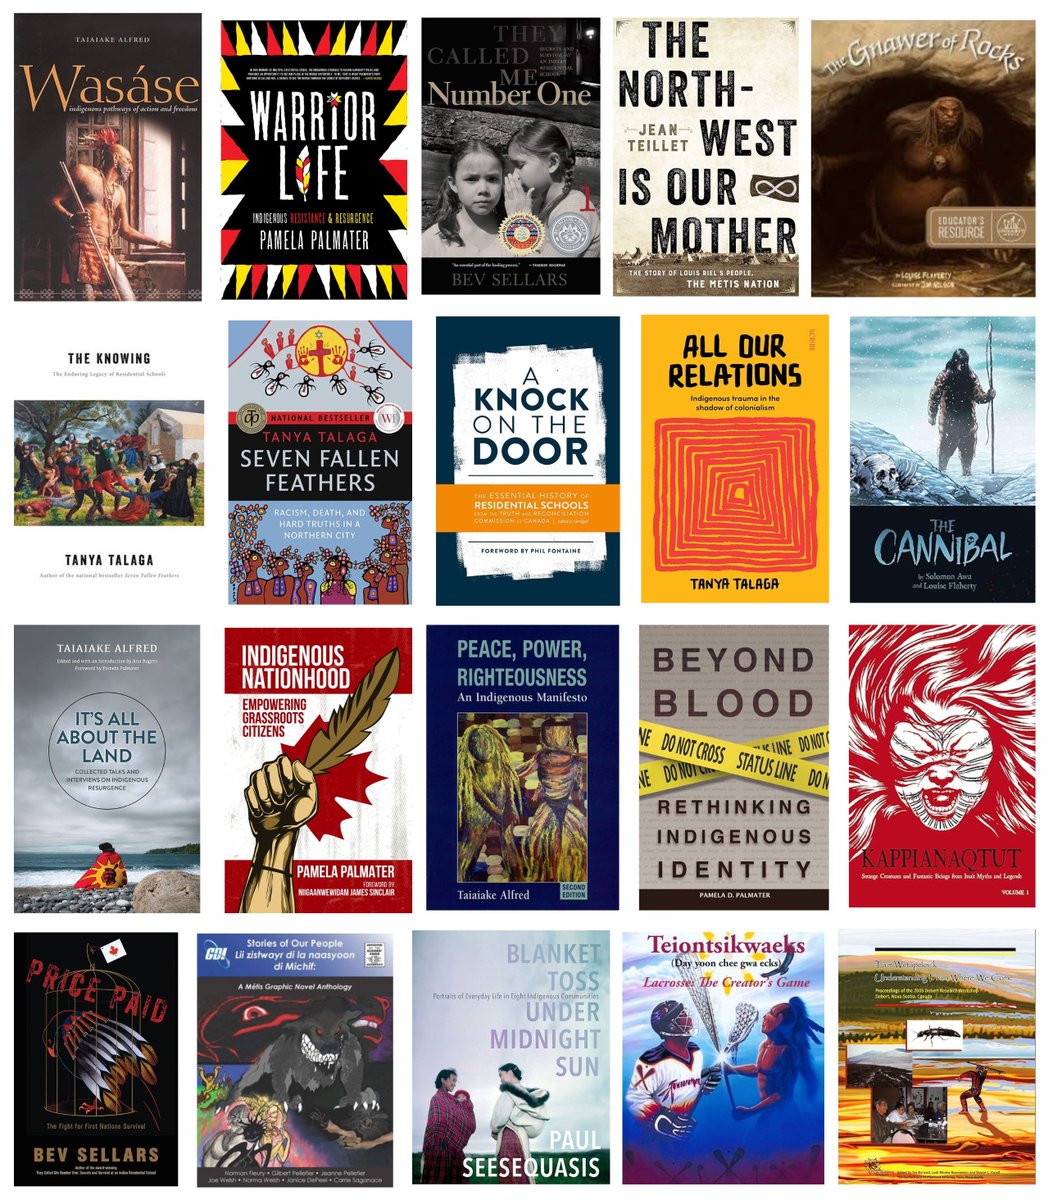 Meet incredible authors at this year’s Indigenous History and Heritage Gathering and learn new ways to share stories, history, and culture. We’ll have some amazing titles from our esteemed speakers available to purchase throughout our event! ihhg.ca